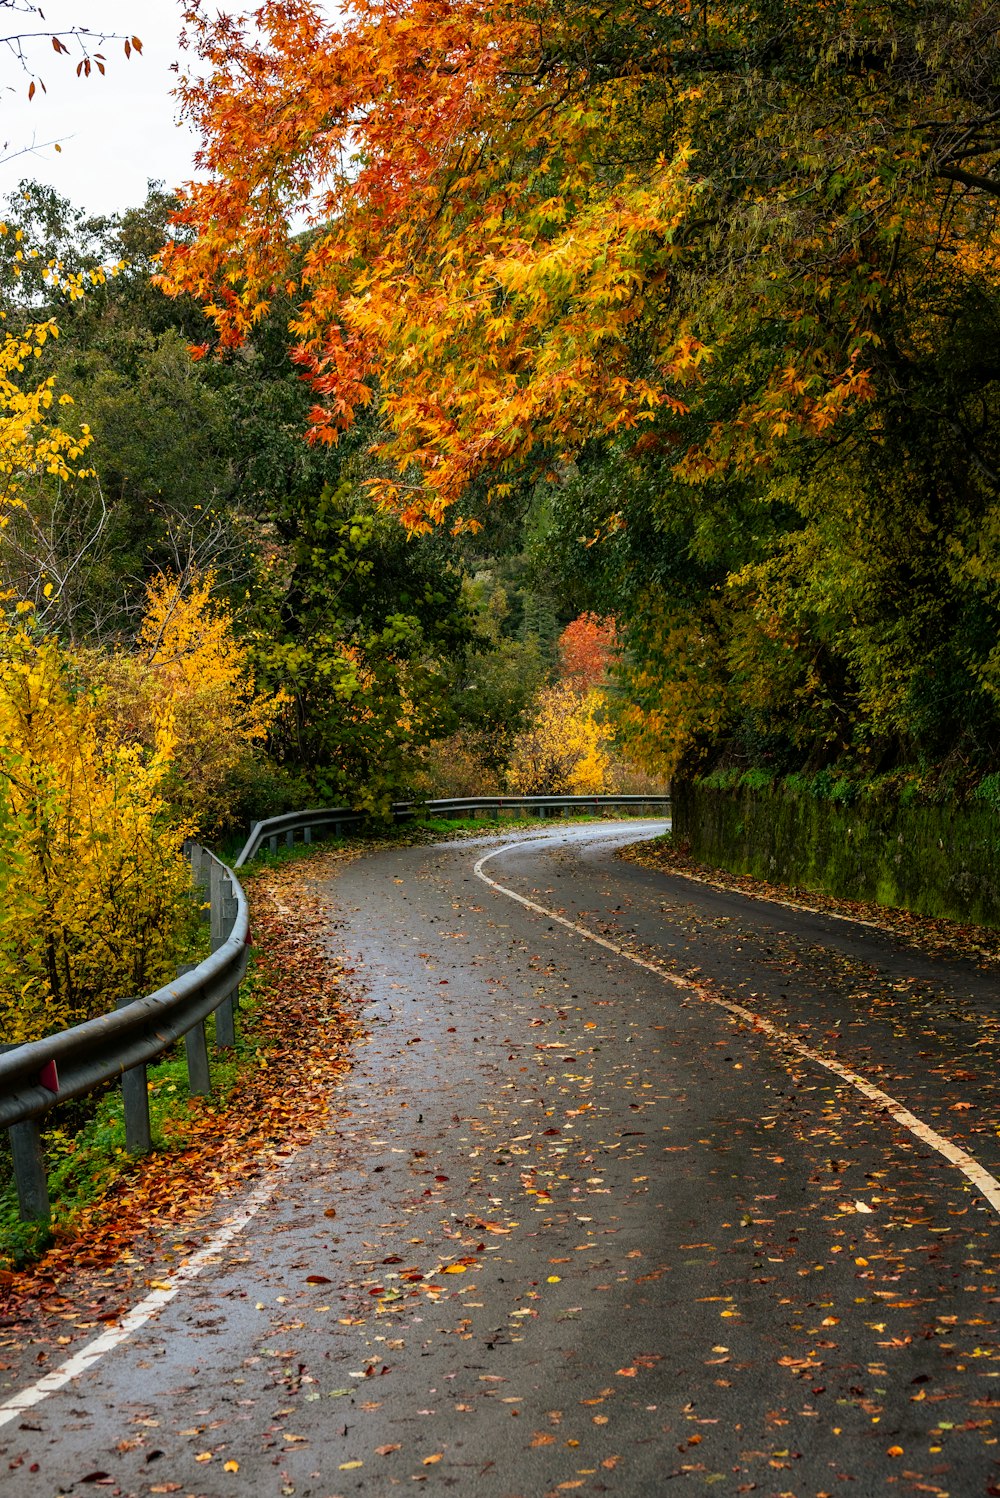 a curved road surrounded by trees with leaves on the ground